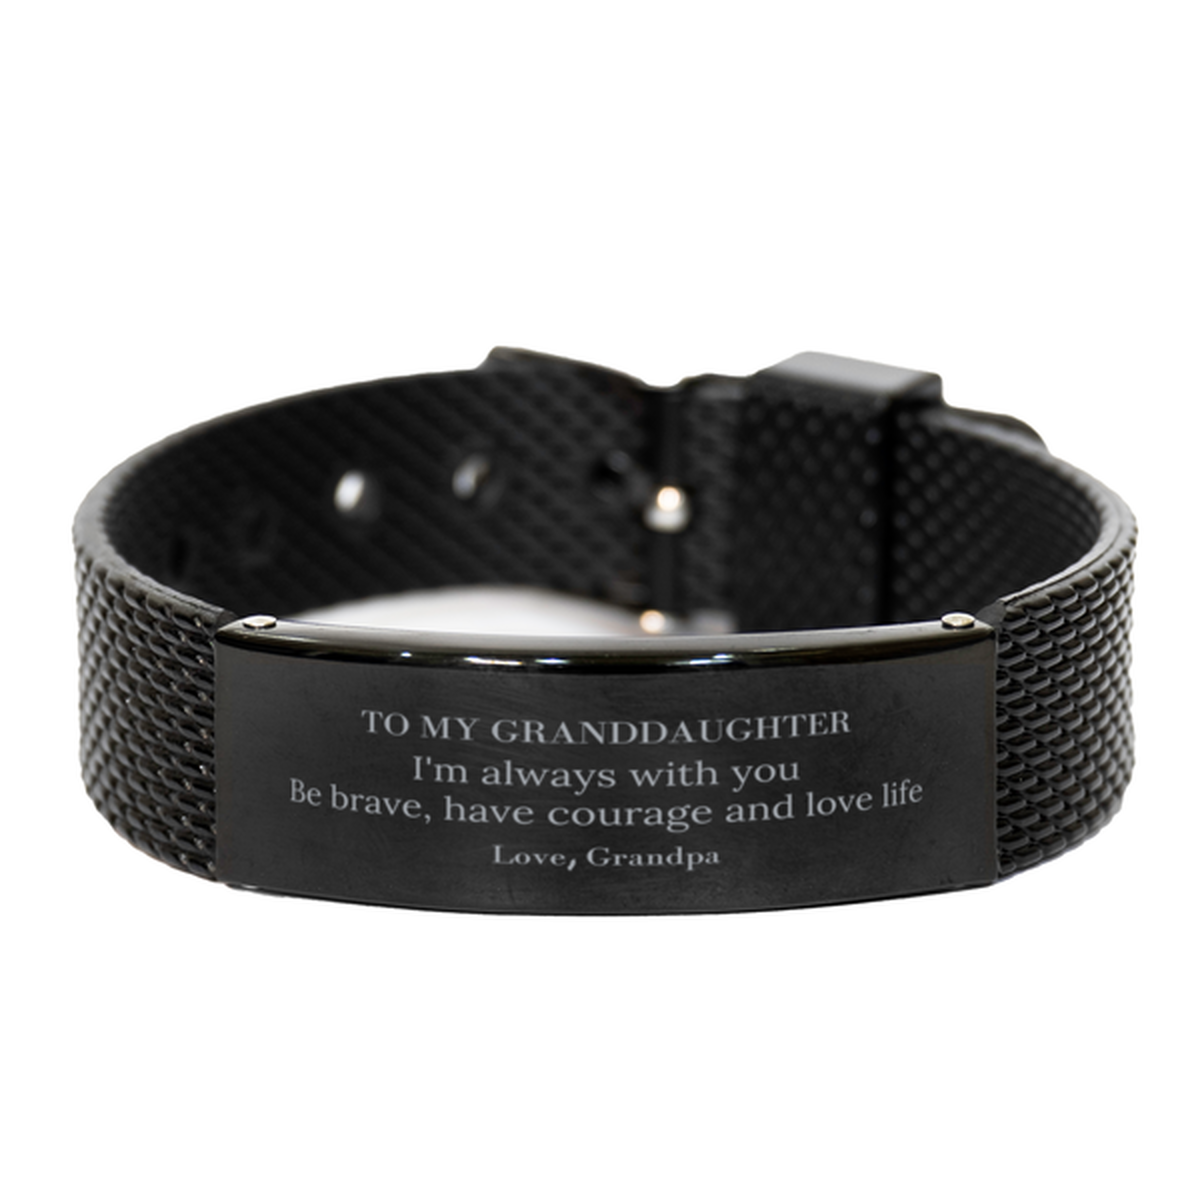 To My Granddaughter Gifts from Grandpa, Unique Black Shark Mesh Bracelet Inspirational Christmas Birthday Graduation Gifts for Granddaughter I'm always with you. Be brave, have courage and love life. Love, Grandpa